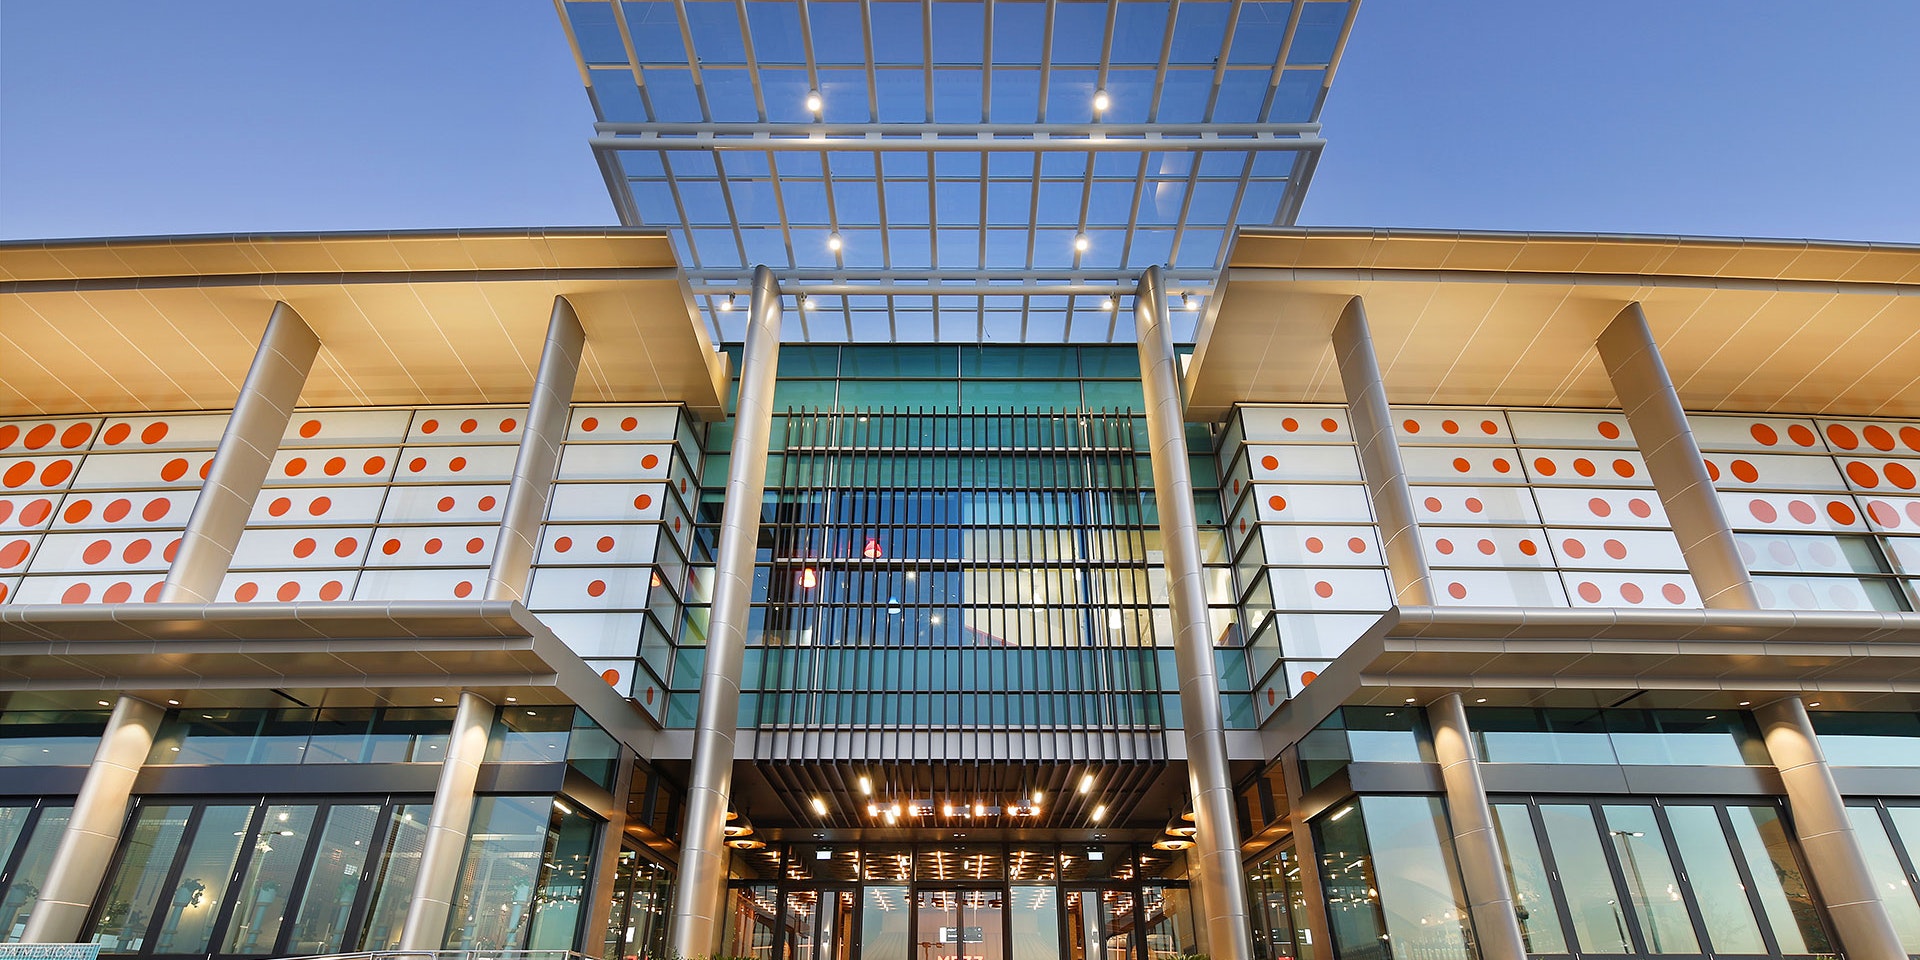 Maxis high-power linear floodlight in application, installed on the facade of Chadstone shopping centre. The fashion capitals sofits are vibrantly illuminated using a rich 2700k colour temperature and oval optics.